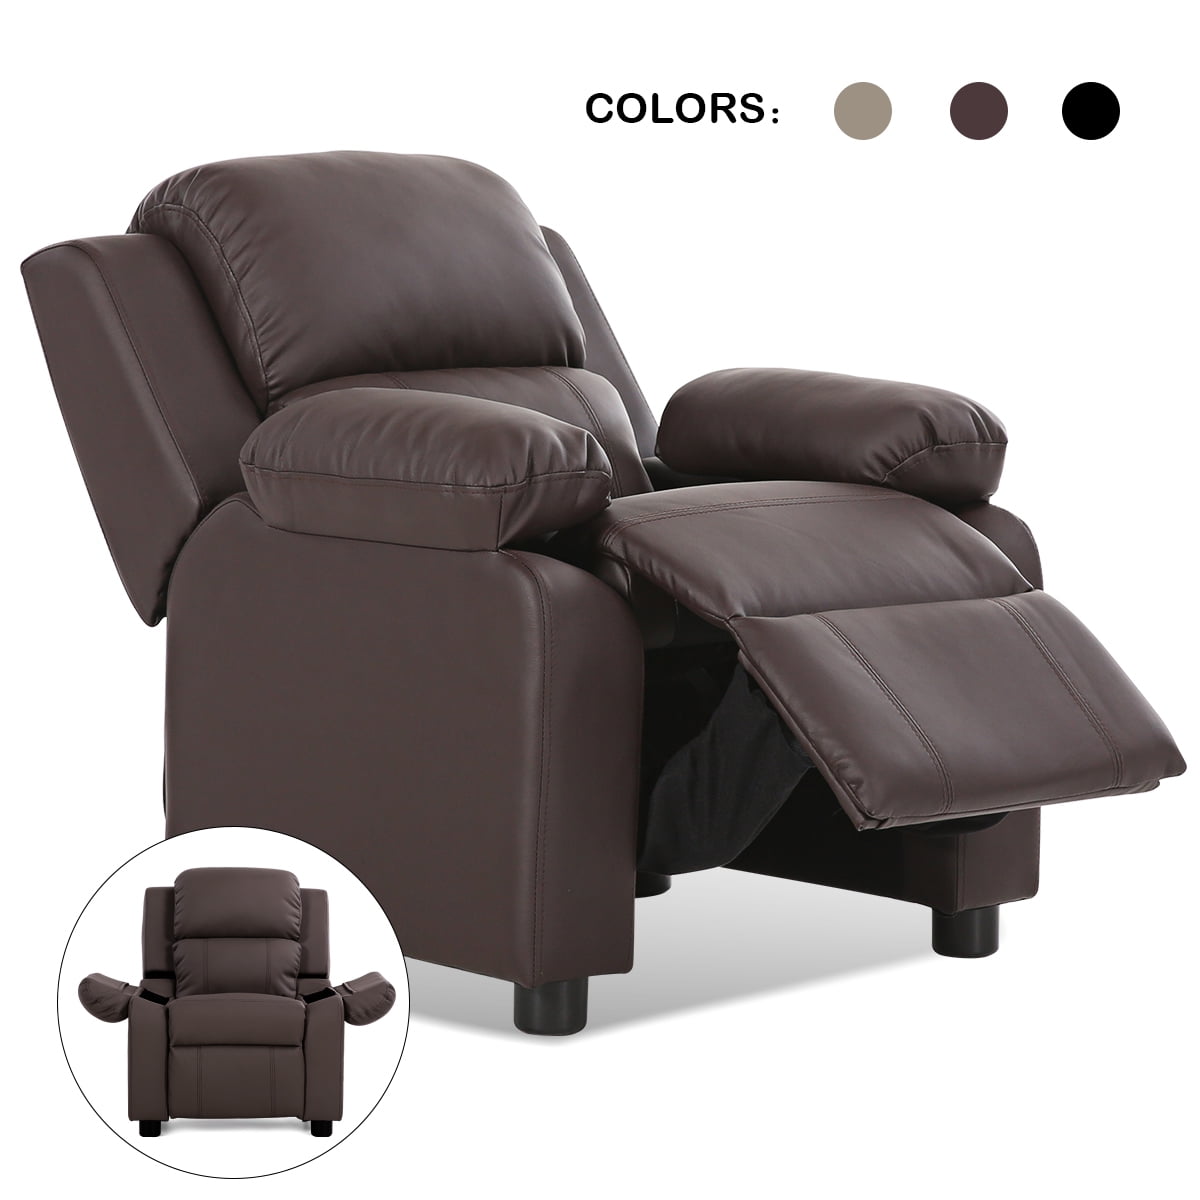 Deluxe Padded Kids Sofa Armchair, Kids Brown Leather Chair